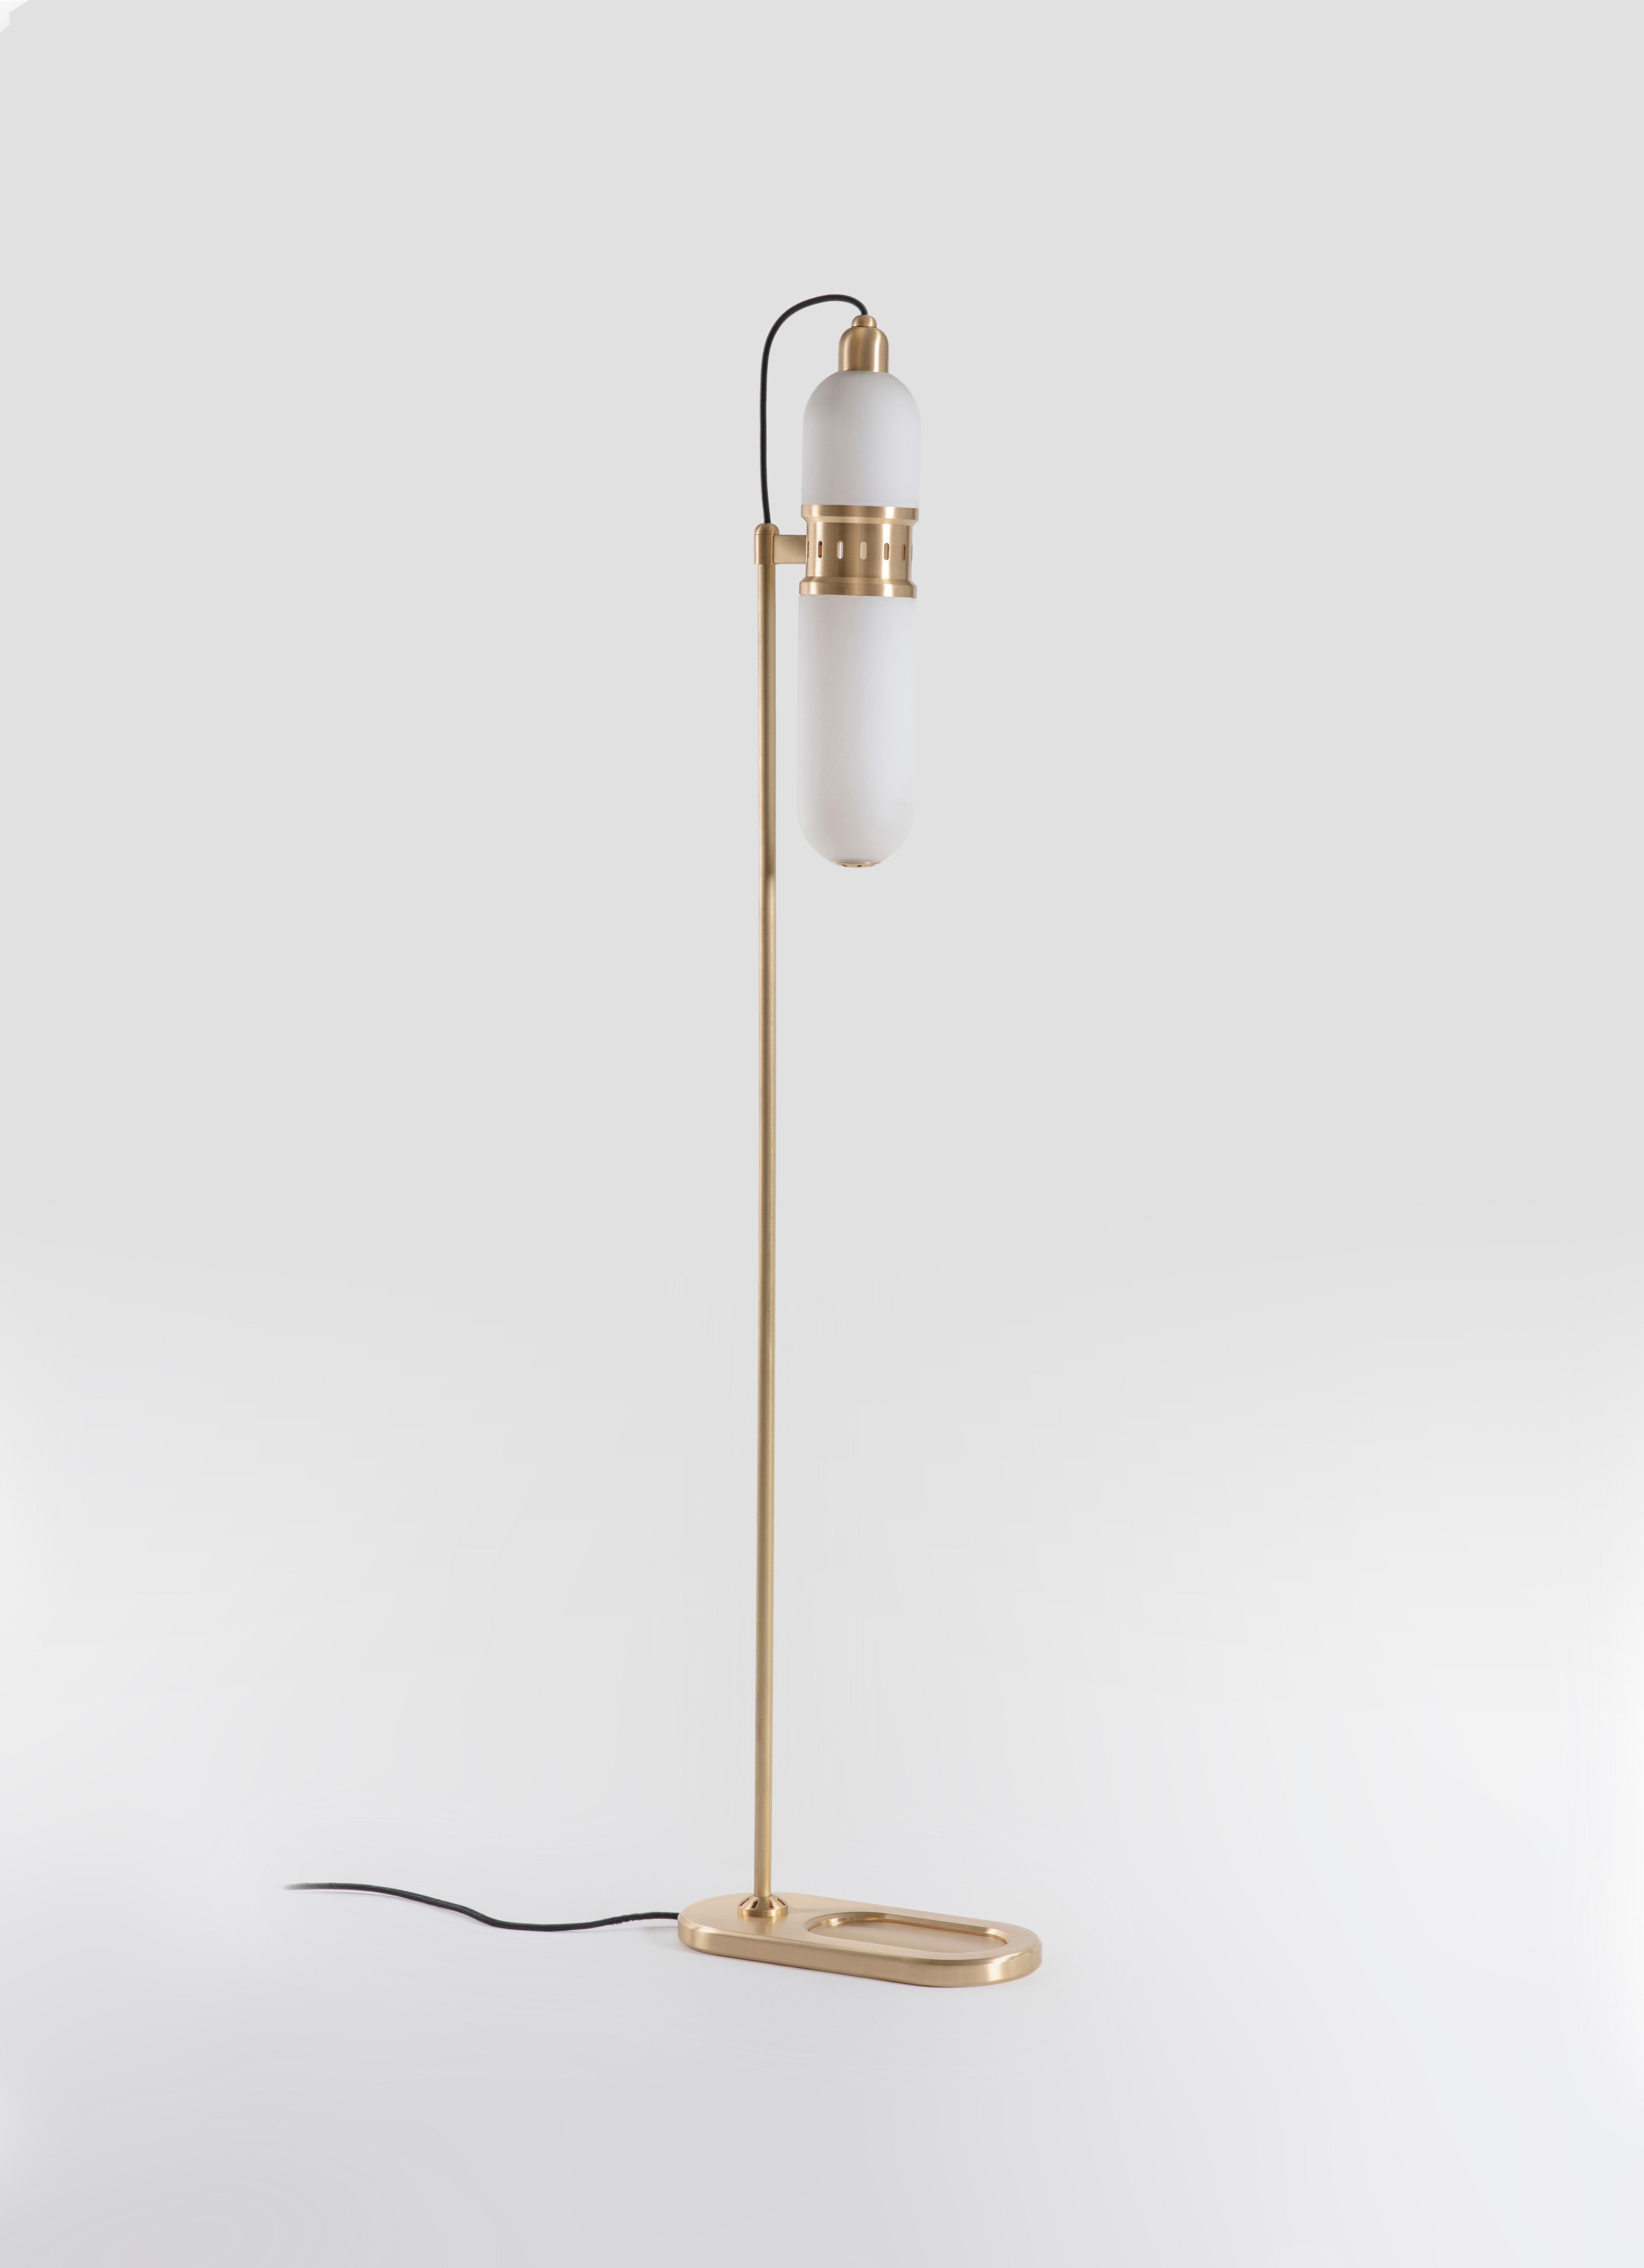 Occulo brass floor lamp by Bert Frank.
Dimensions: 35 x H 140 cm.
Materials: brass, glass.

All our lamps can be wired according to each country. If sold to the USA it will be wired for the USA for instance.

When Adam Yeats and Robbie